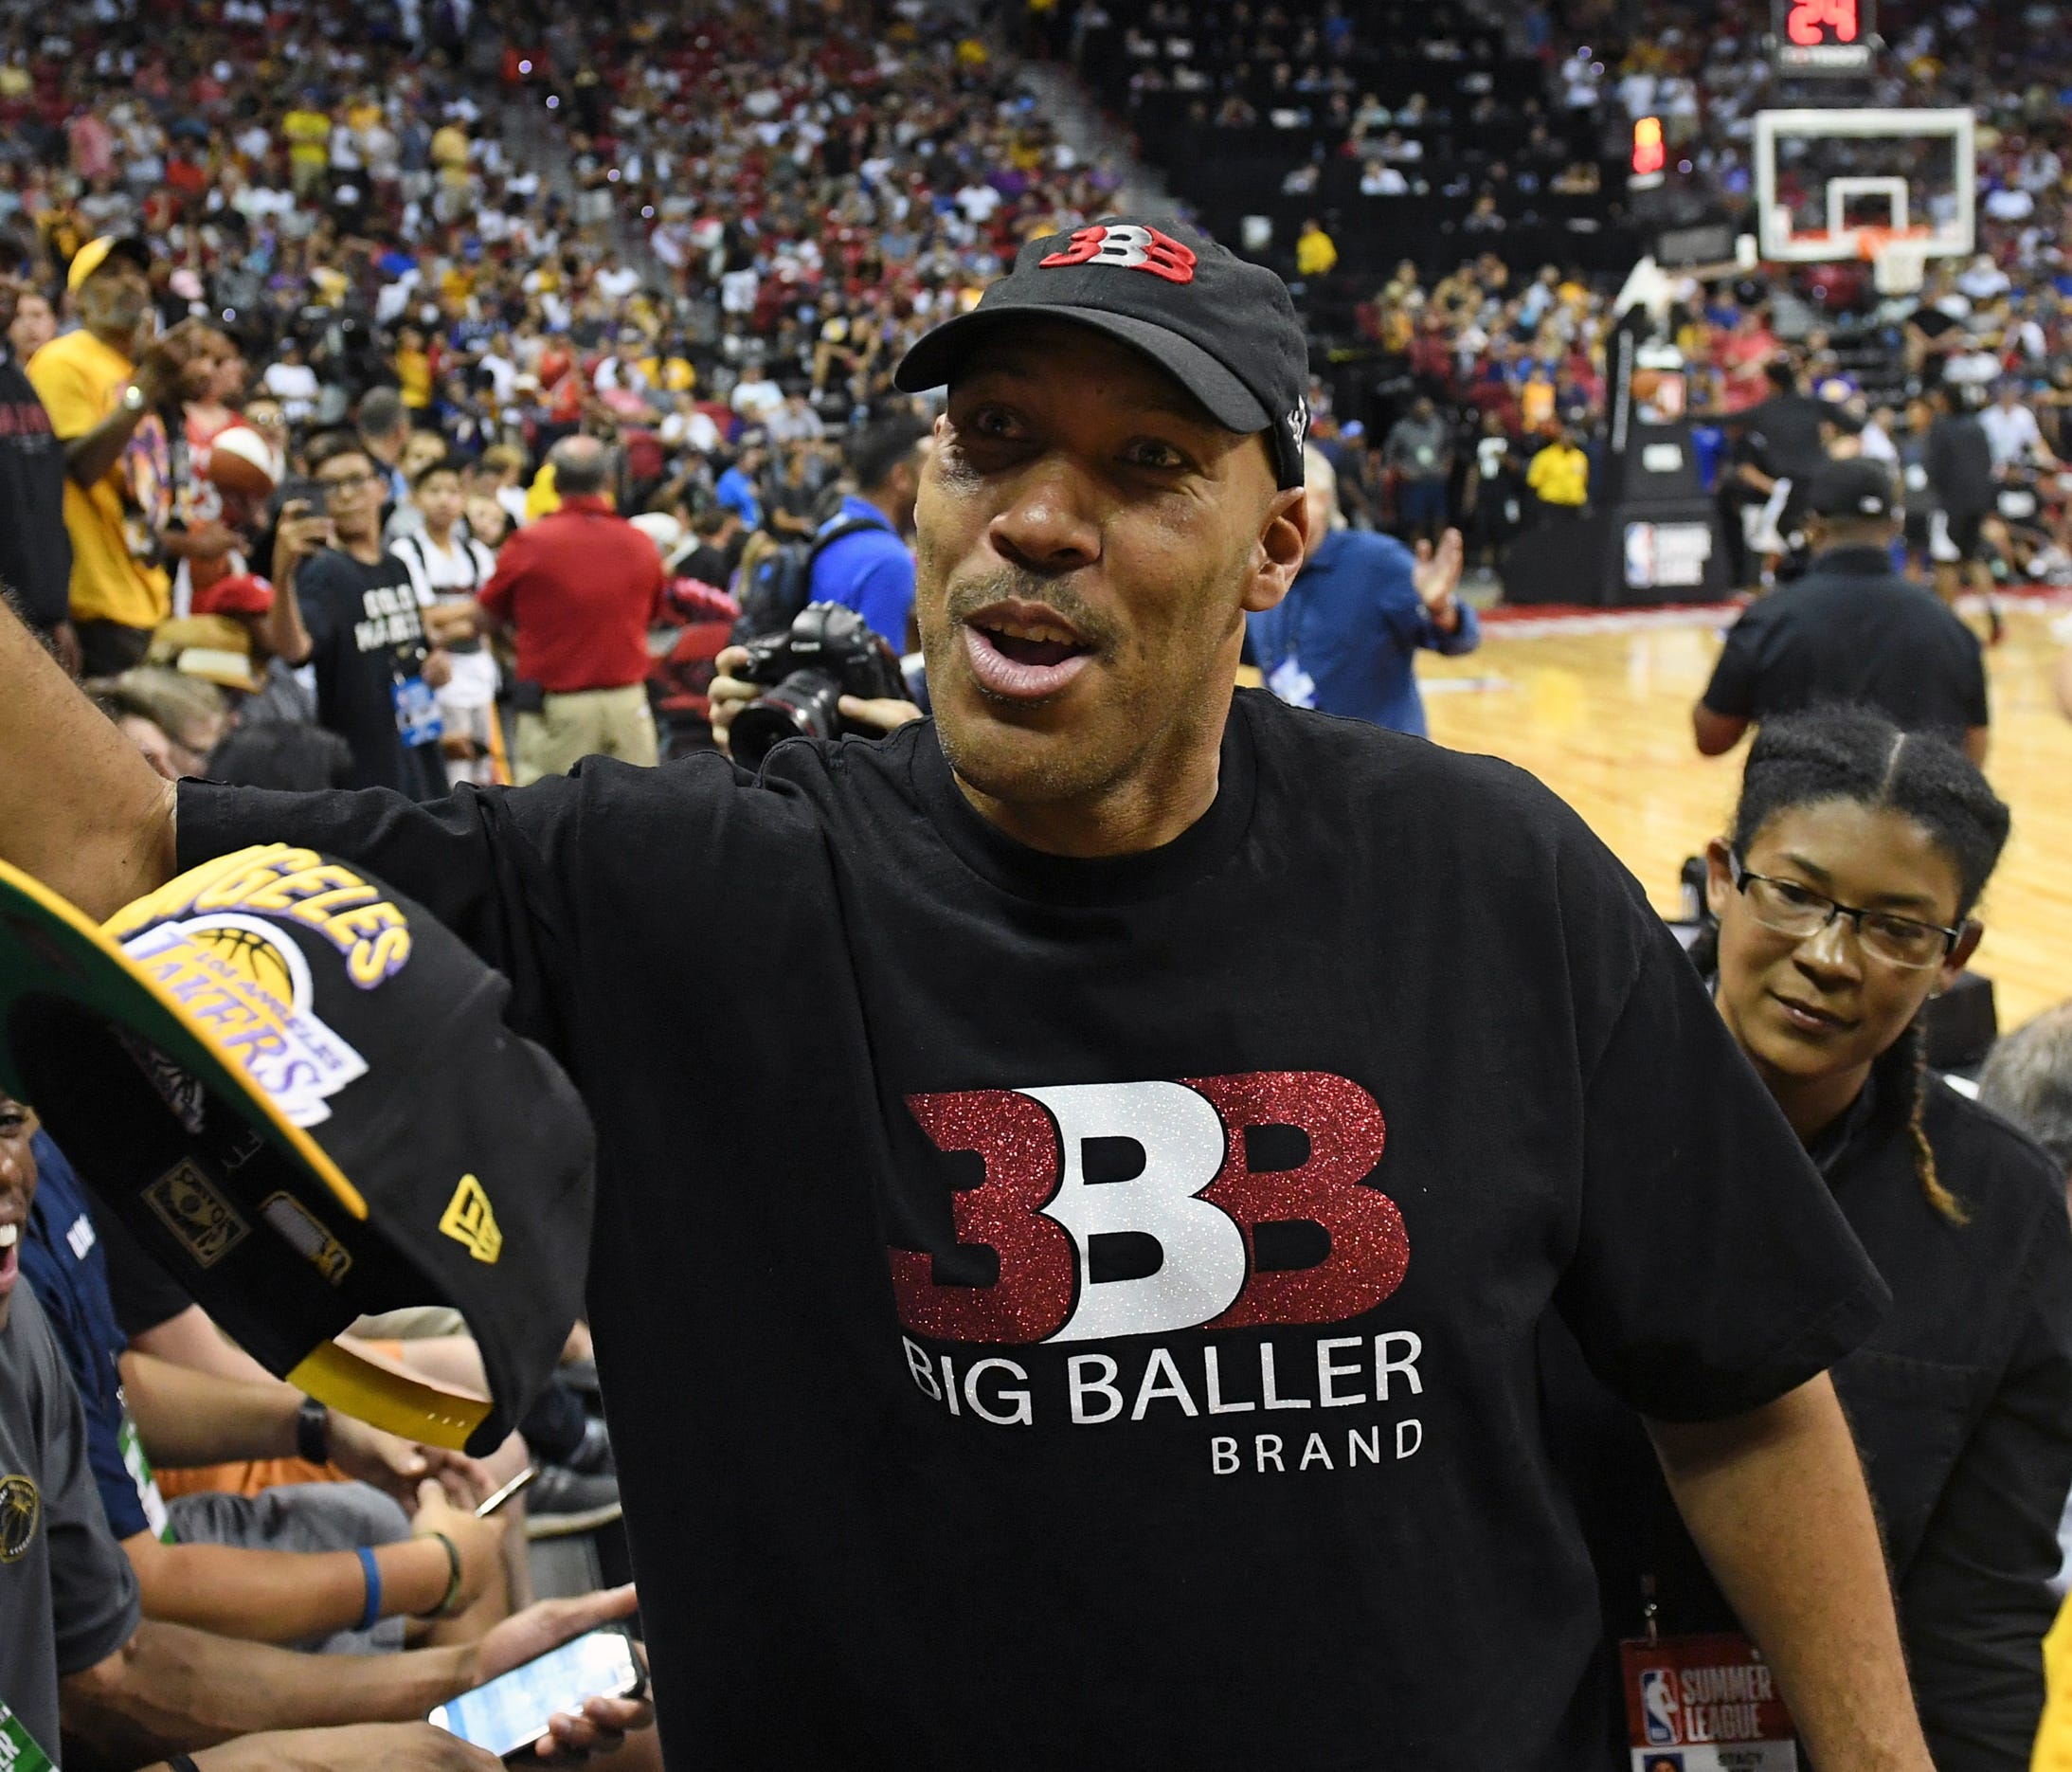 LaVar Ball, father of Lonzo Ball #2 of the Los Angeles Lakers, greets fans at halftime of a 2017 Summer League game between the Lakers and the Los Angeles Clippers at the Thomas & Mack Center on July 7, 2017 in Las Vegas, Nevada.